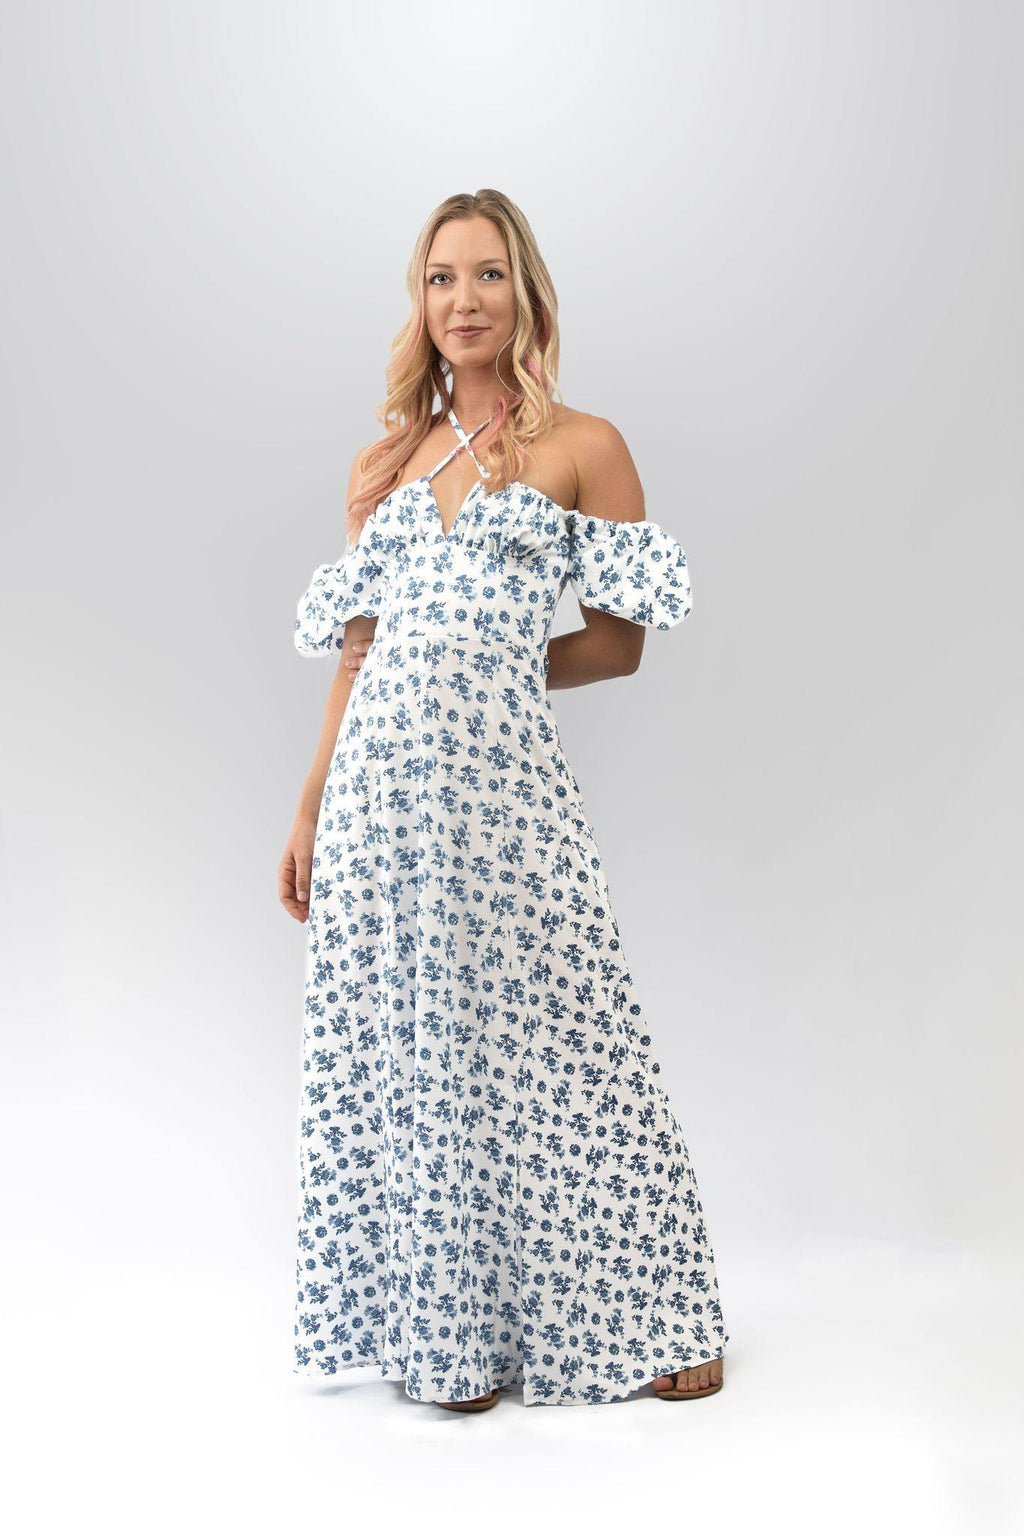 Floral Milkmaid Maxi Dress in White and Blue - watts that trend